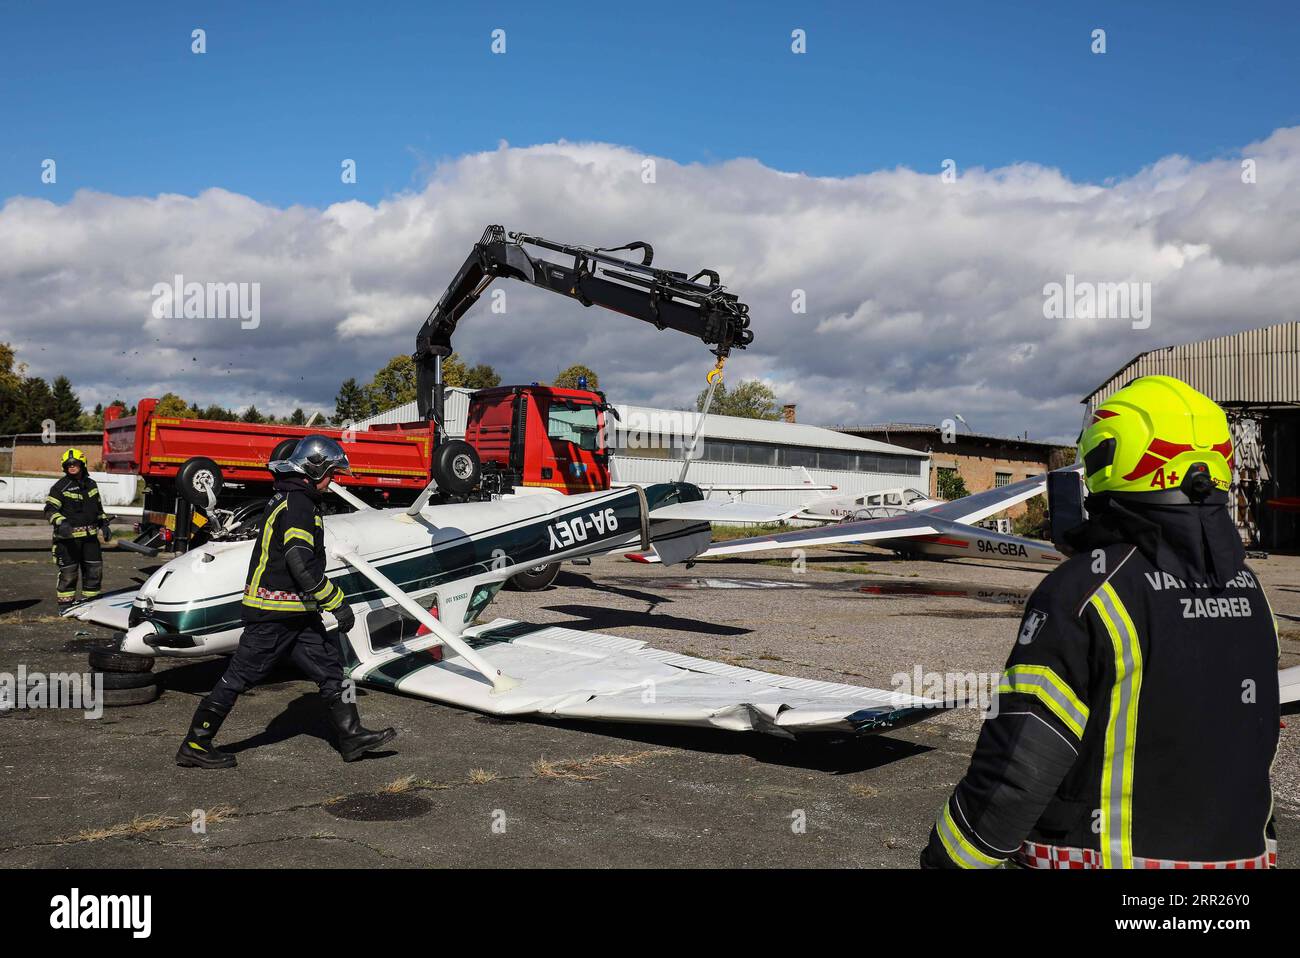 201004 -- ZAGREB, Oct. 4, 2020 -- Firefighters prepare to turn over a plane damaged by strong wind at Lucko Sport Airport near Zagreb, Croatia, Oct. 4, 2020. A big storm with strong wind, heavy rain and hail hit northwestern Croatia on Saturday night. /Pixsell via Xinhua CROATIA-ZAGREB-STORM-AIRPORT JuricaxGaloic PUBLICATIONxNOTxINxCHN Stock Photo